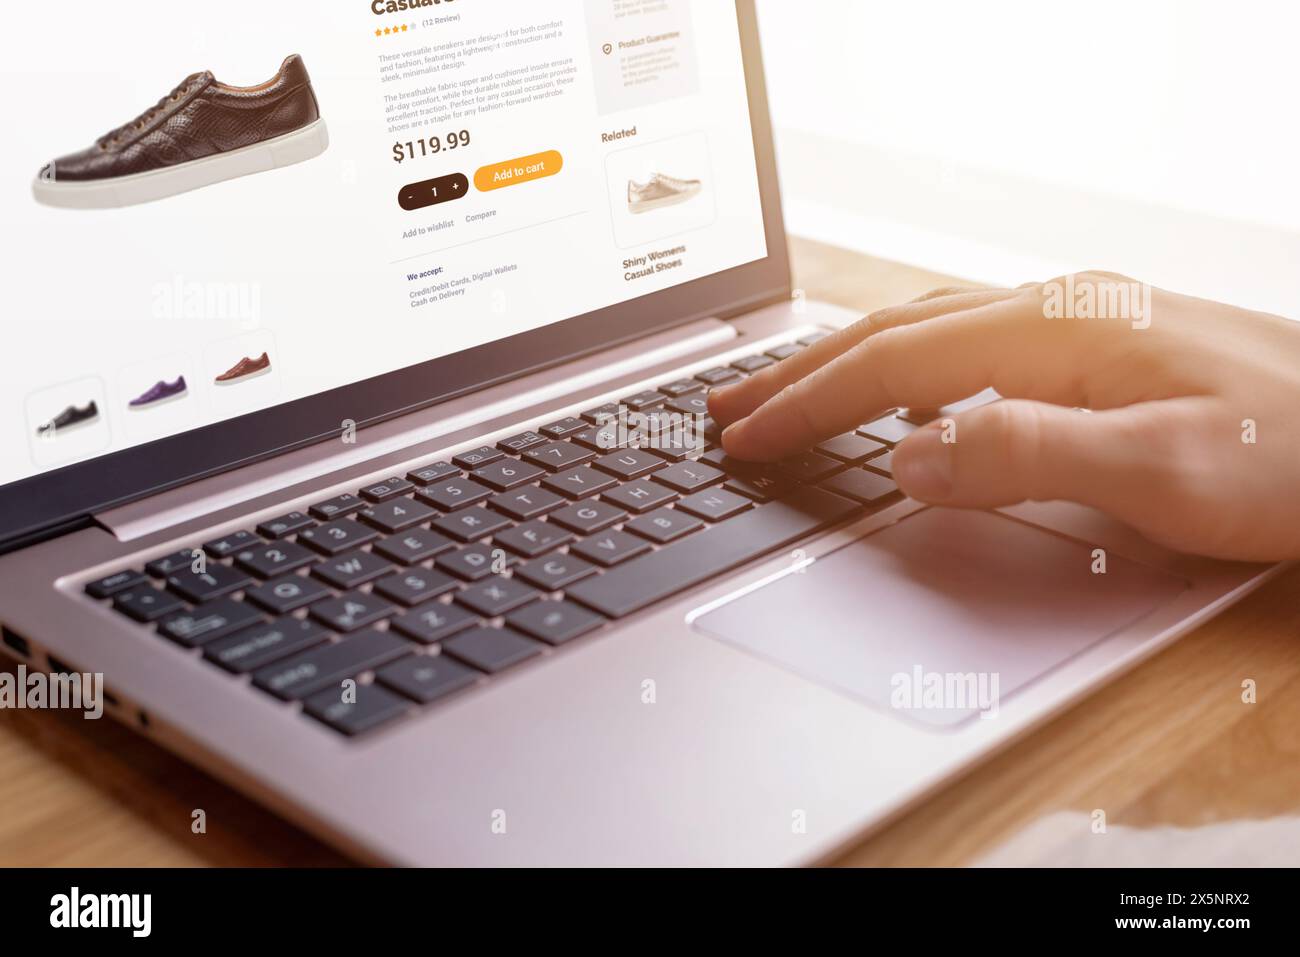 Hands on keyboard searching for modern shoes. E-commerce interface concept. Seamless digital shopping experience for shoe enthusiasts Stock Photo